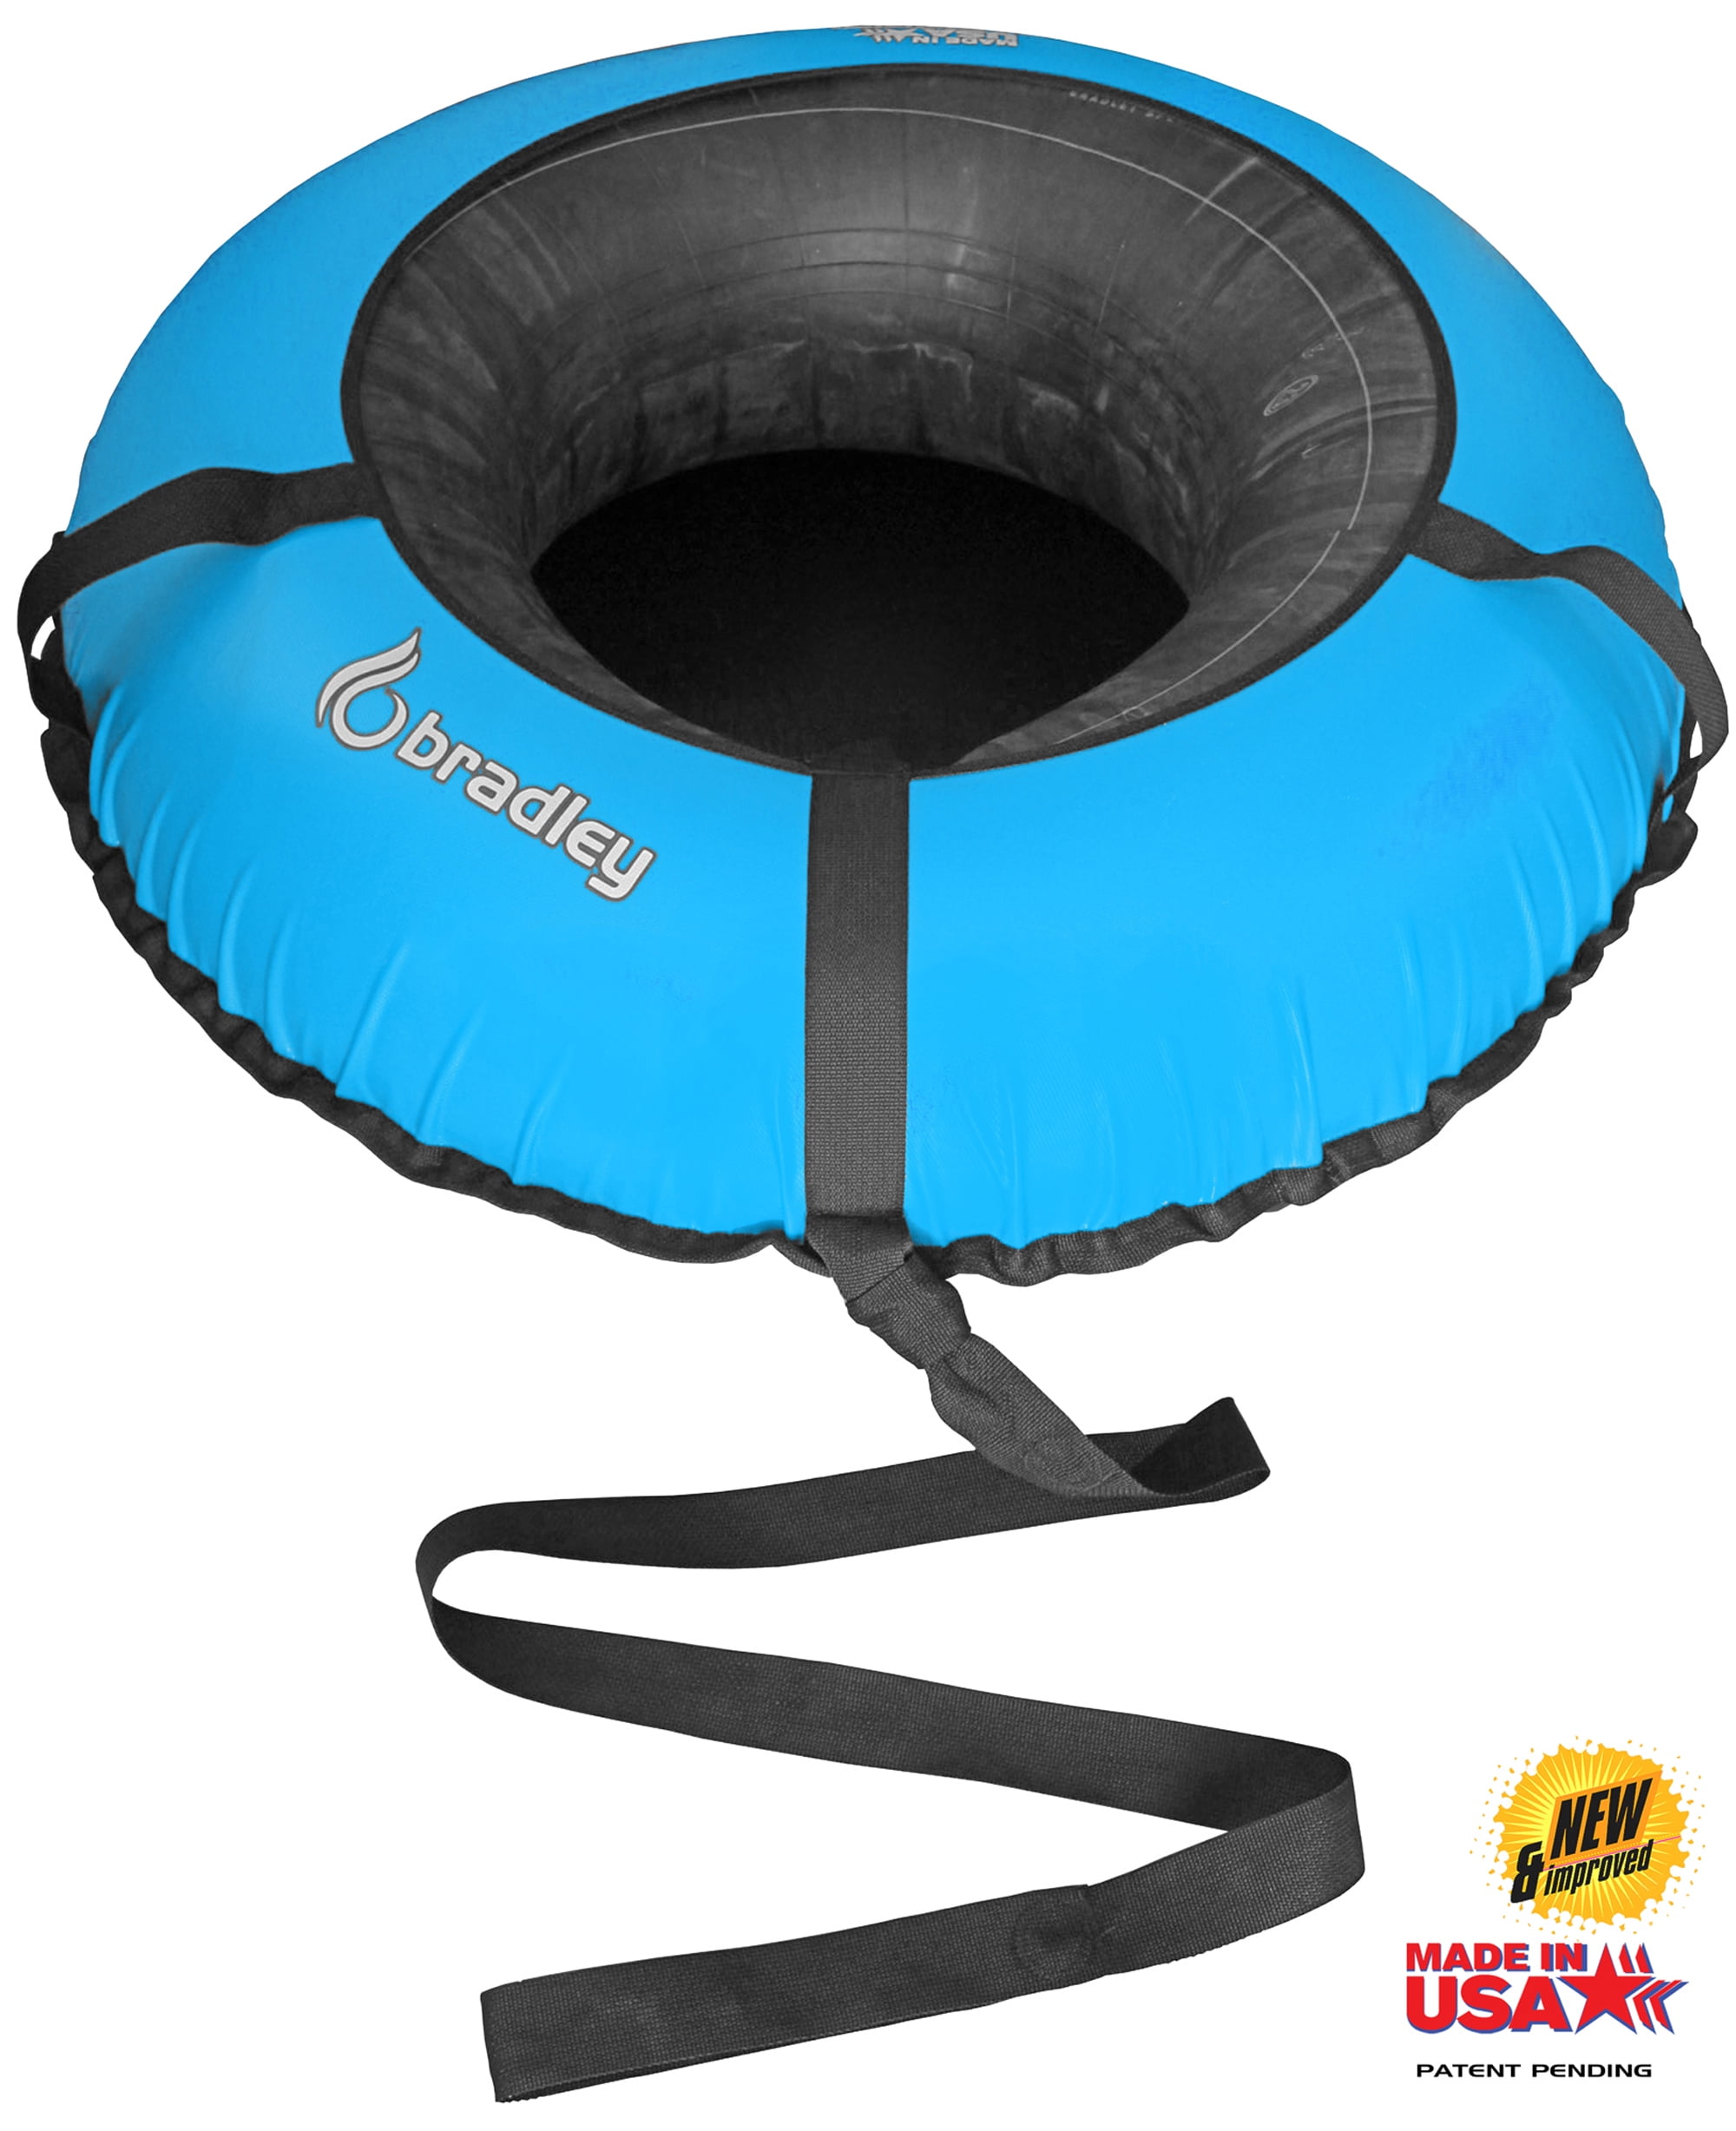 Heavy Duty 47 Outdoor Inflatable Snow Sled for Kids Adults Yowein Snow Tubes for Sledding Towable Freeze-Proof & Wear-Resistant PVC Snow Tube with 2 Handles Winter Thickening Skiing Ring 